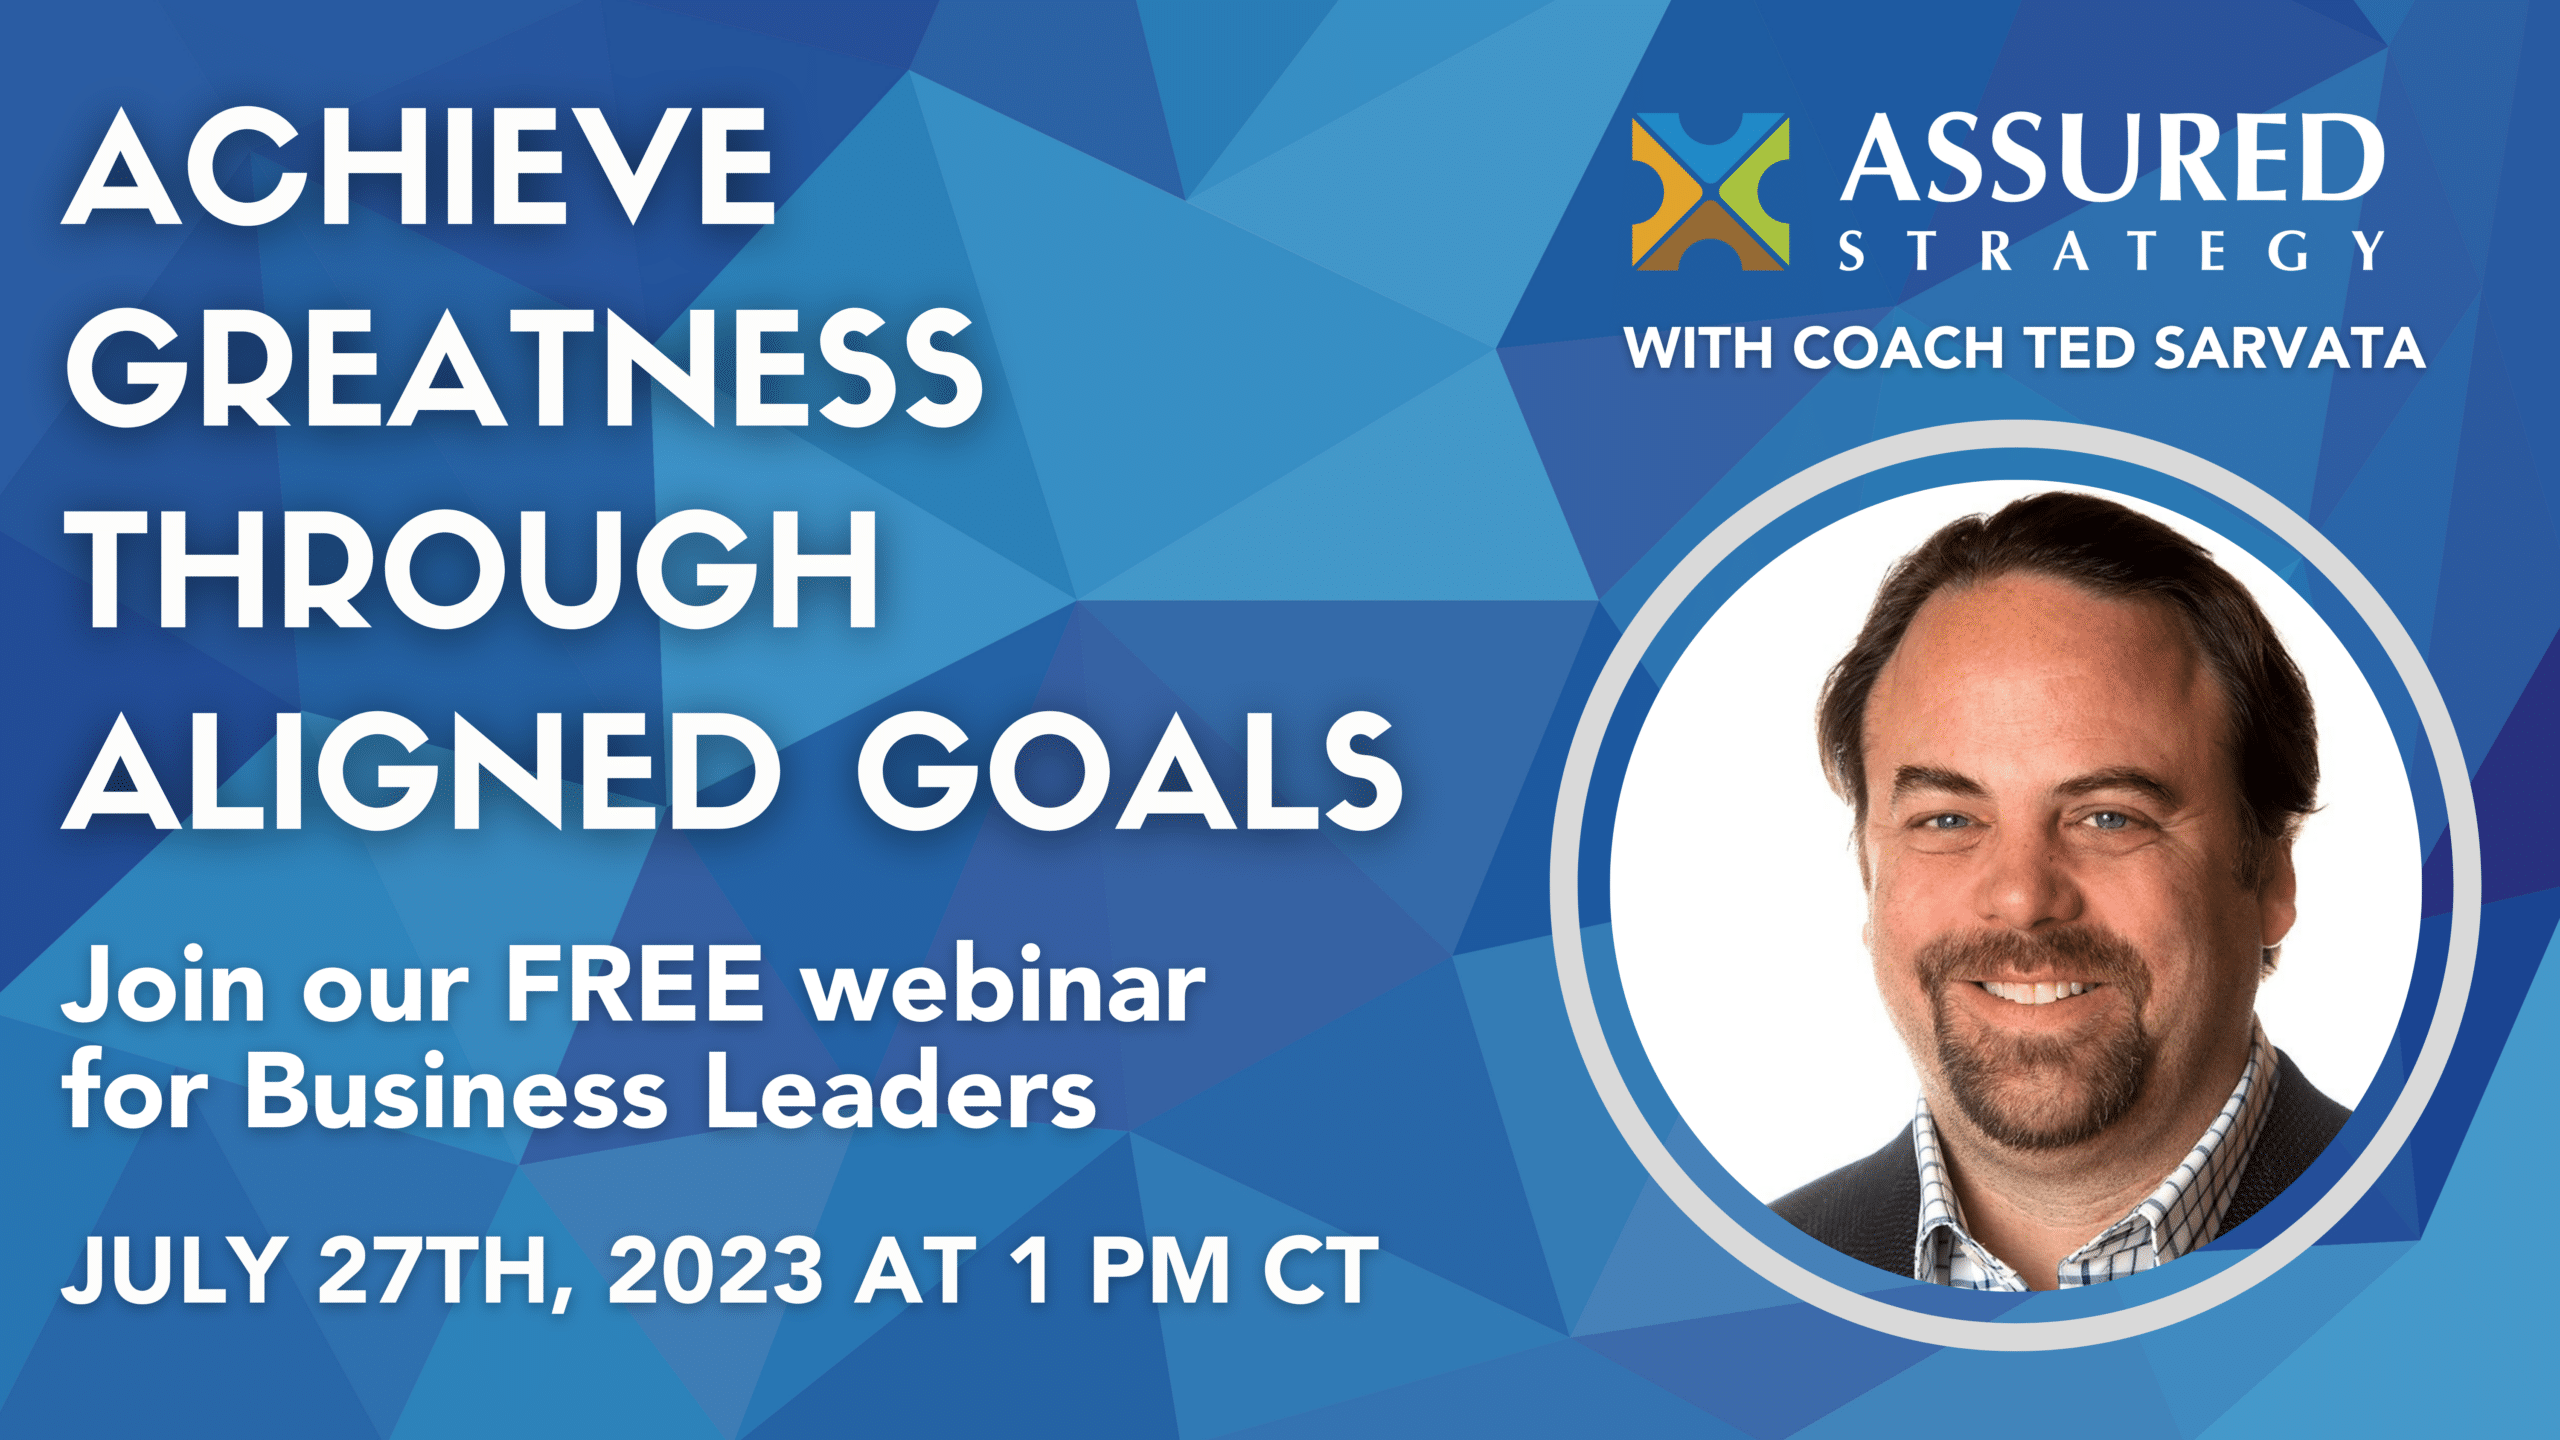 Free Webinar: Where Are You Headed? Mission/Vision/BHAG®